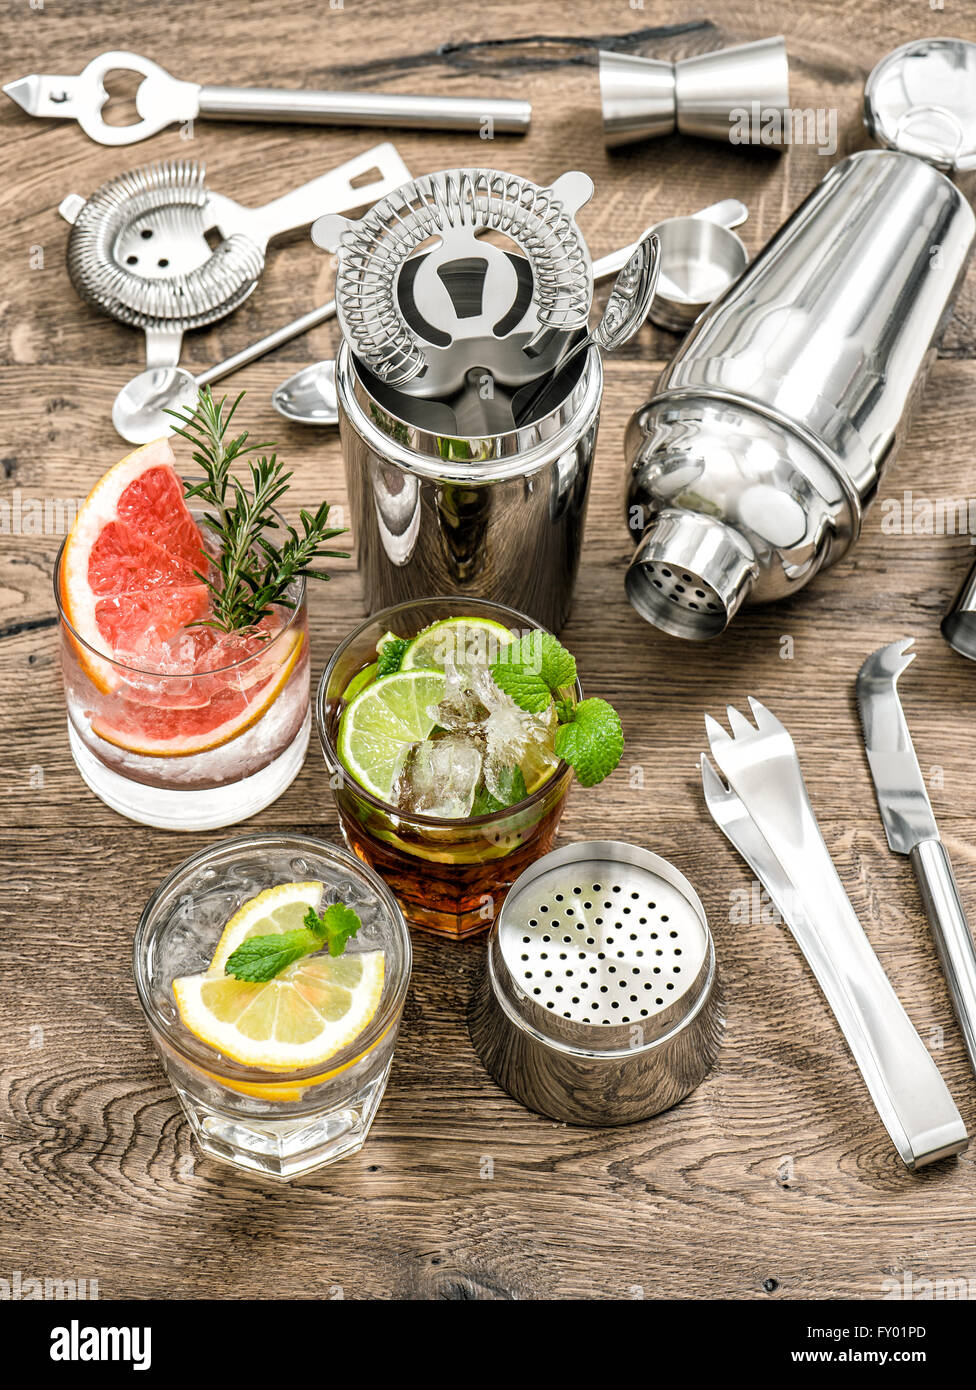 Cocktails with fruits and ice. Bar drink making tools Stock Photo